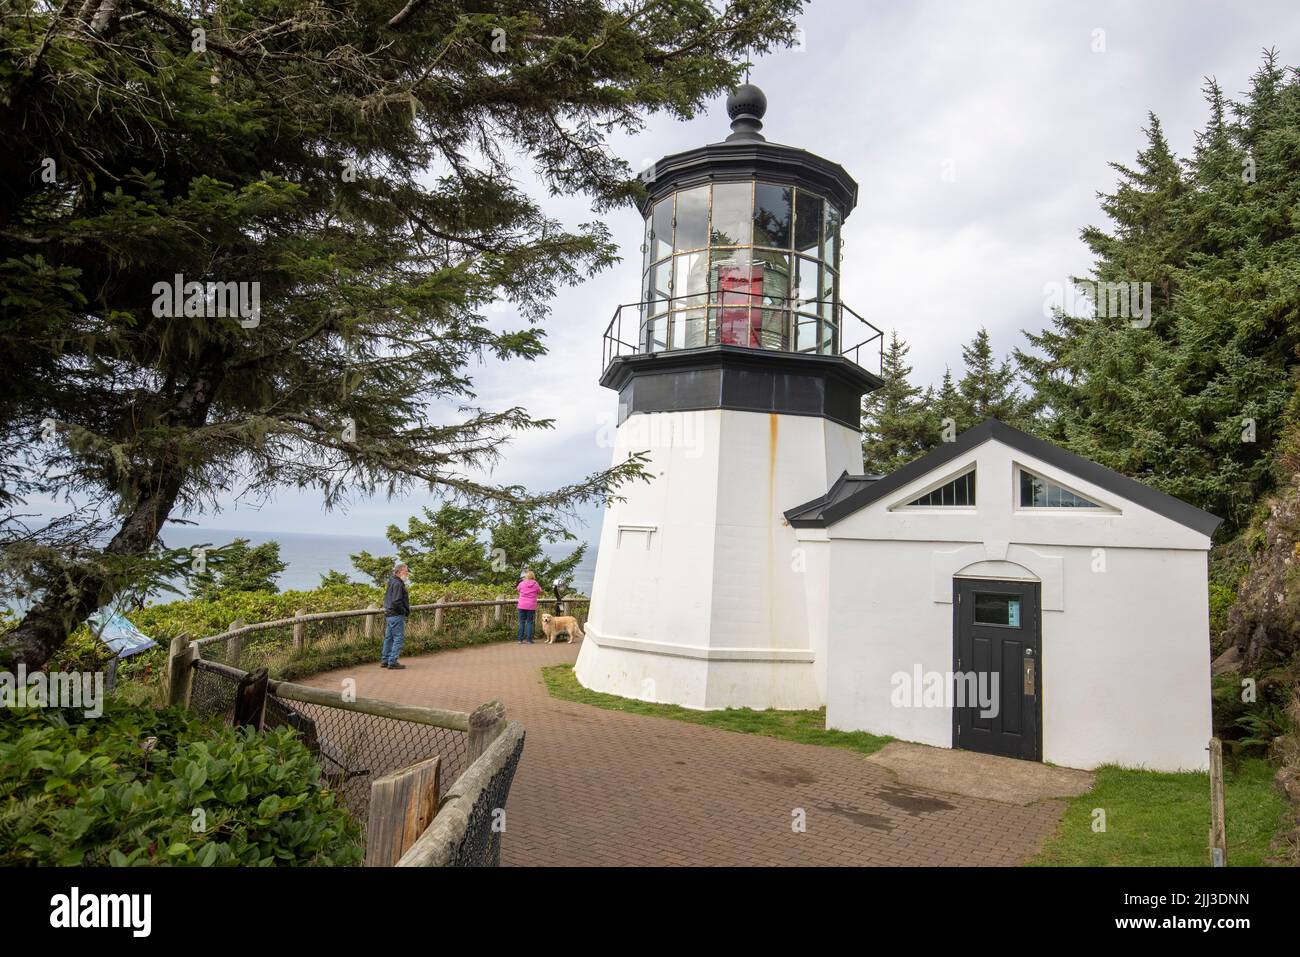 The Cape Meares Lighthouse is a lighthouse on the coast of Oregon. It is located on Cape Meares just south of Tillamook Bay. Stock Photo